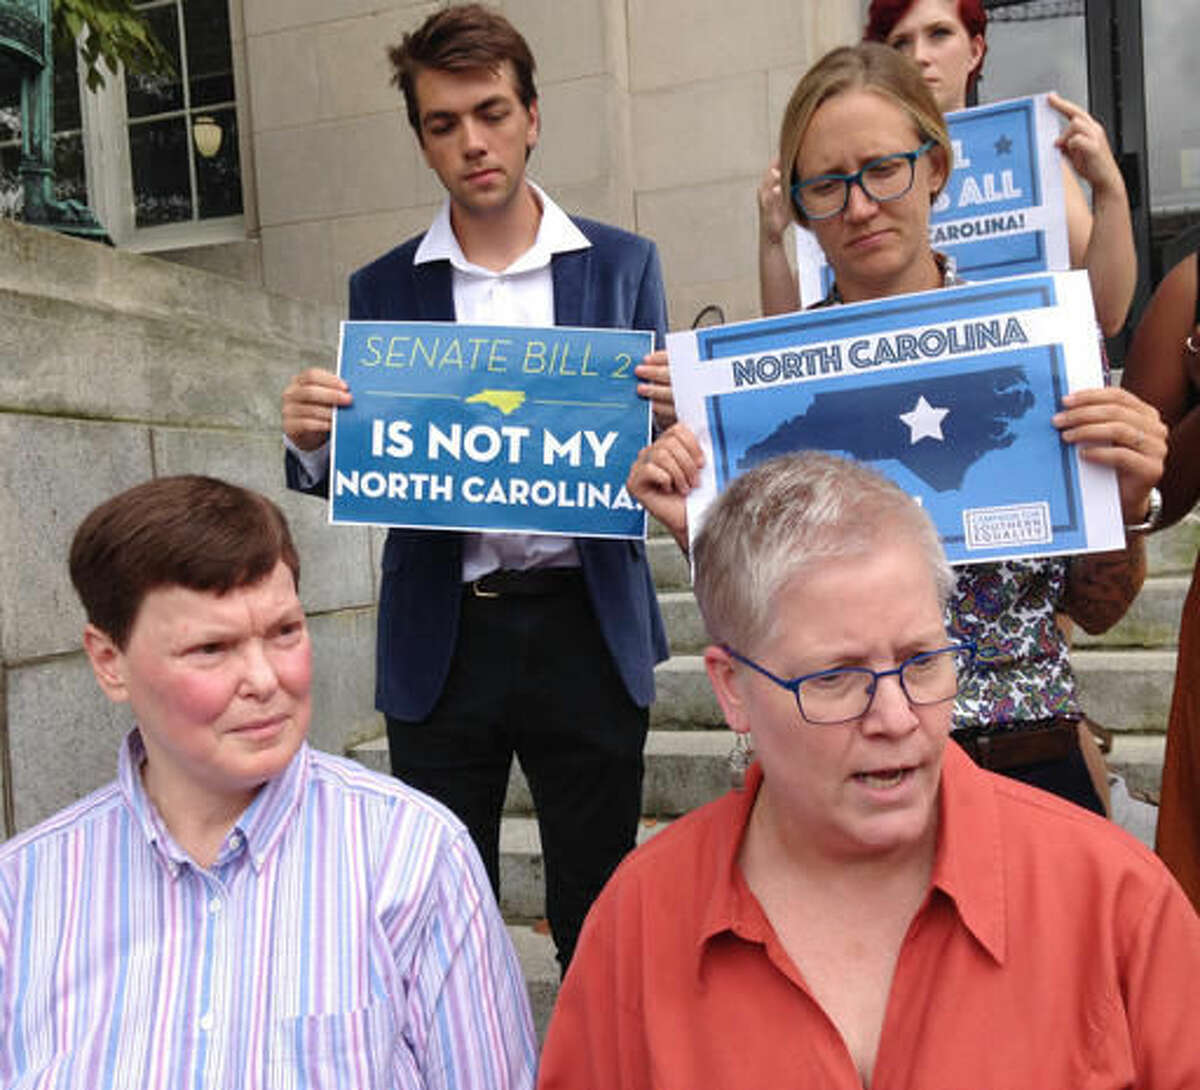 Diane Ansley, left and her spouse, Cathy McGaughey, right, talk about their challenge to North Carolina's law allowing magistrates to opt out of performing gay marriages for religious reasons outside the federal courthouse in Asheville, N.C. on Monday, Aug. 8, 2016. (AP Photo/Jeffrey Collins)